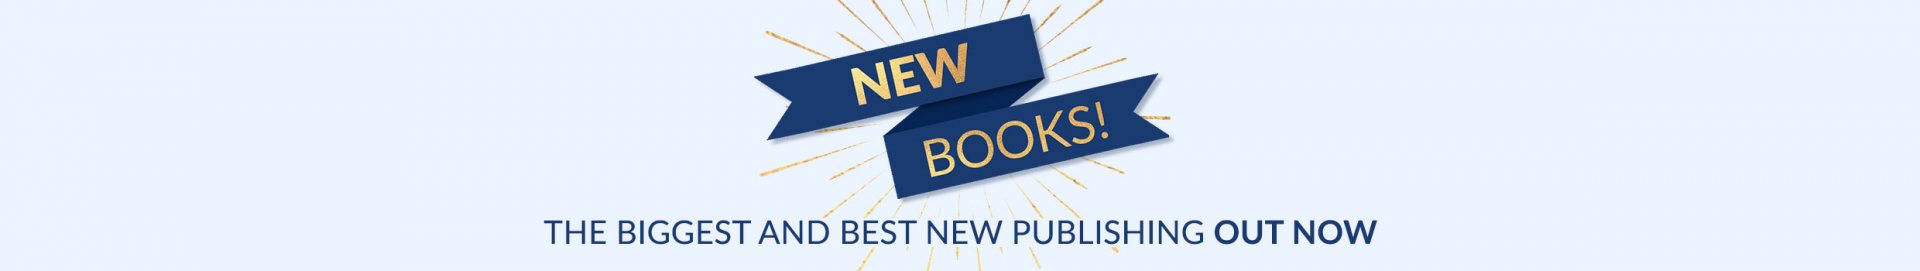 New Books The Biggest and best new publishing out now